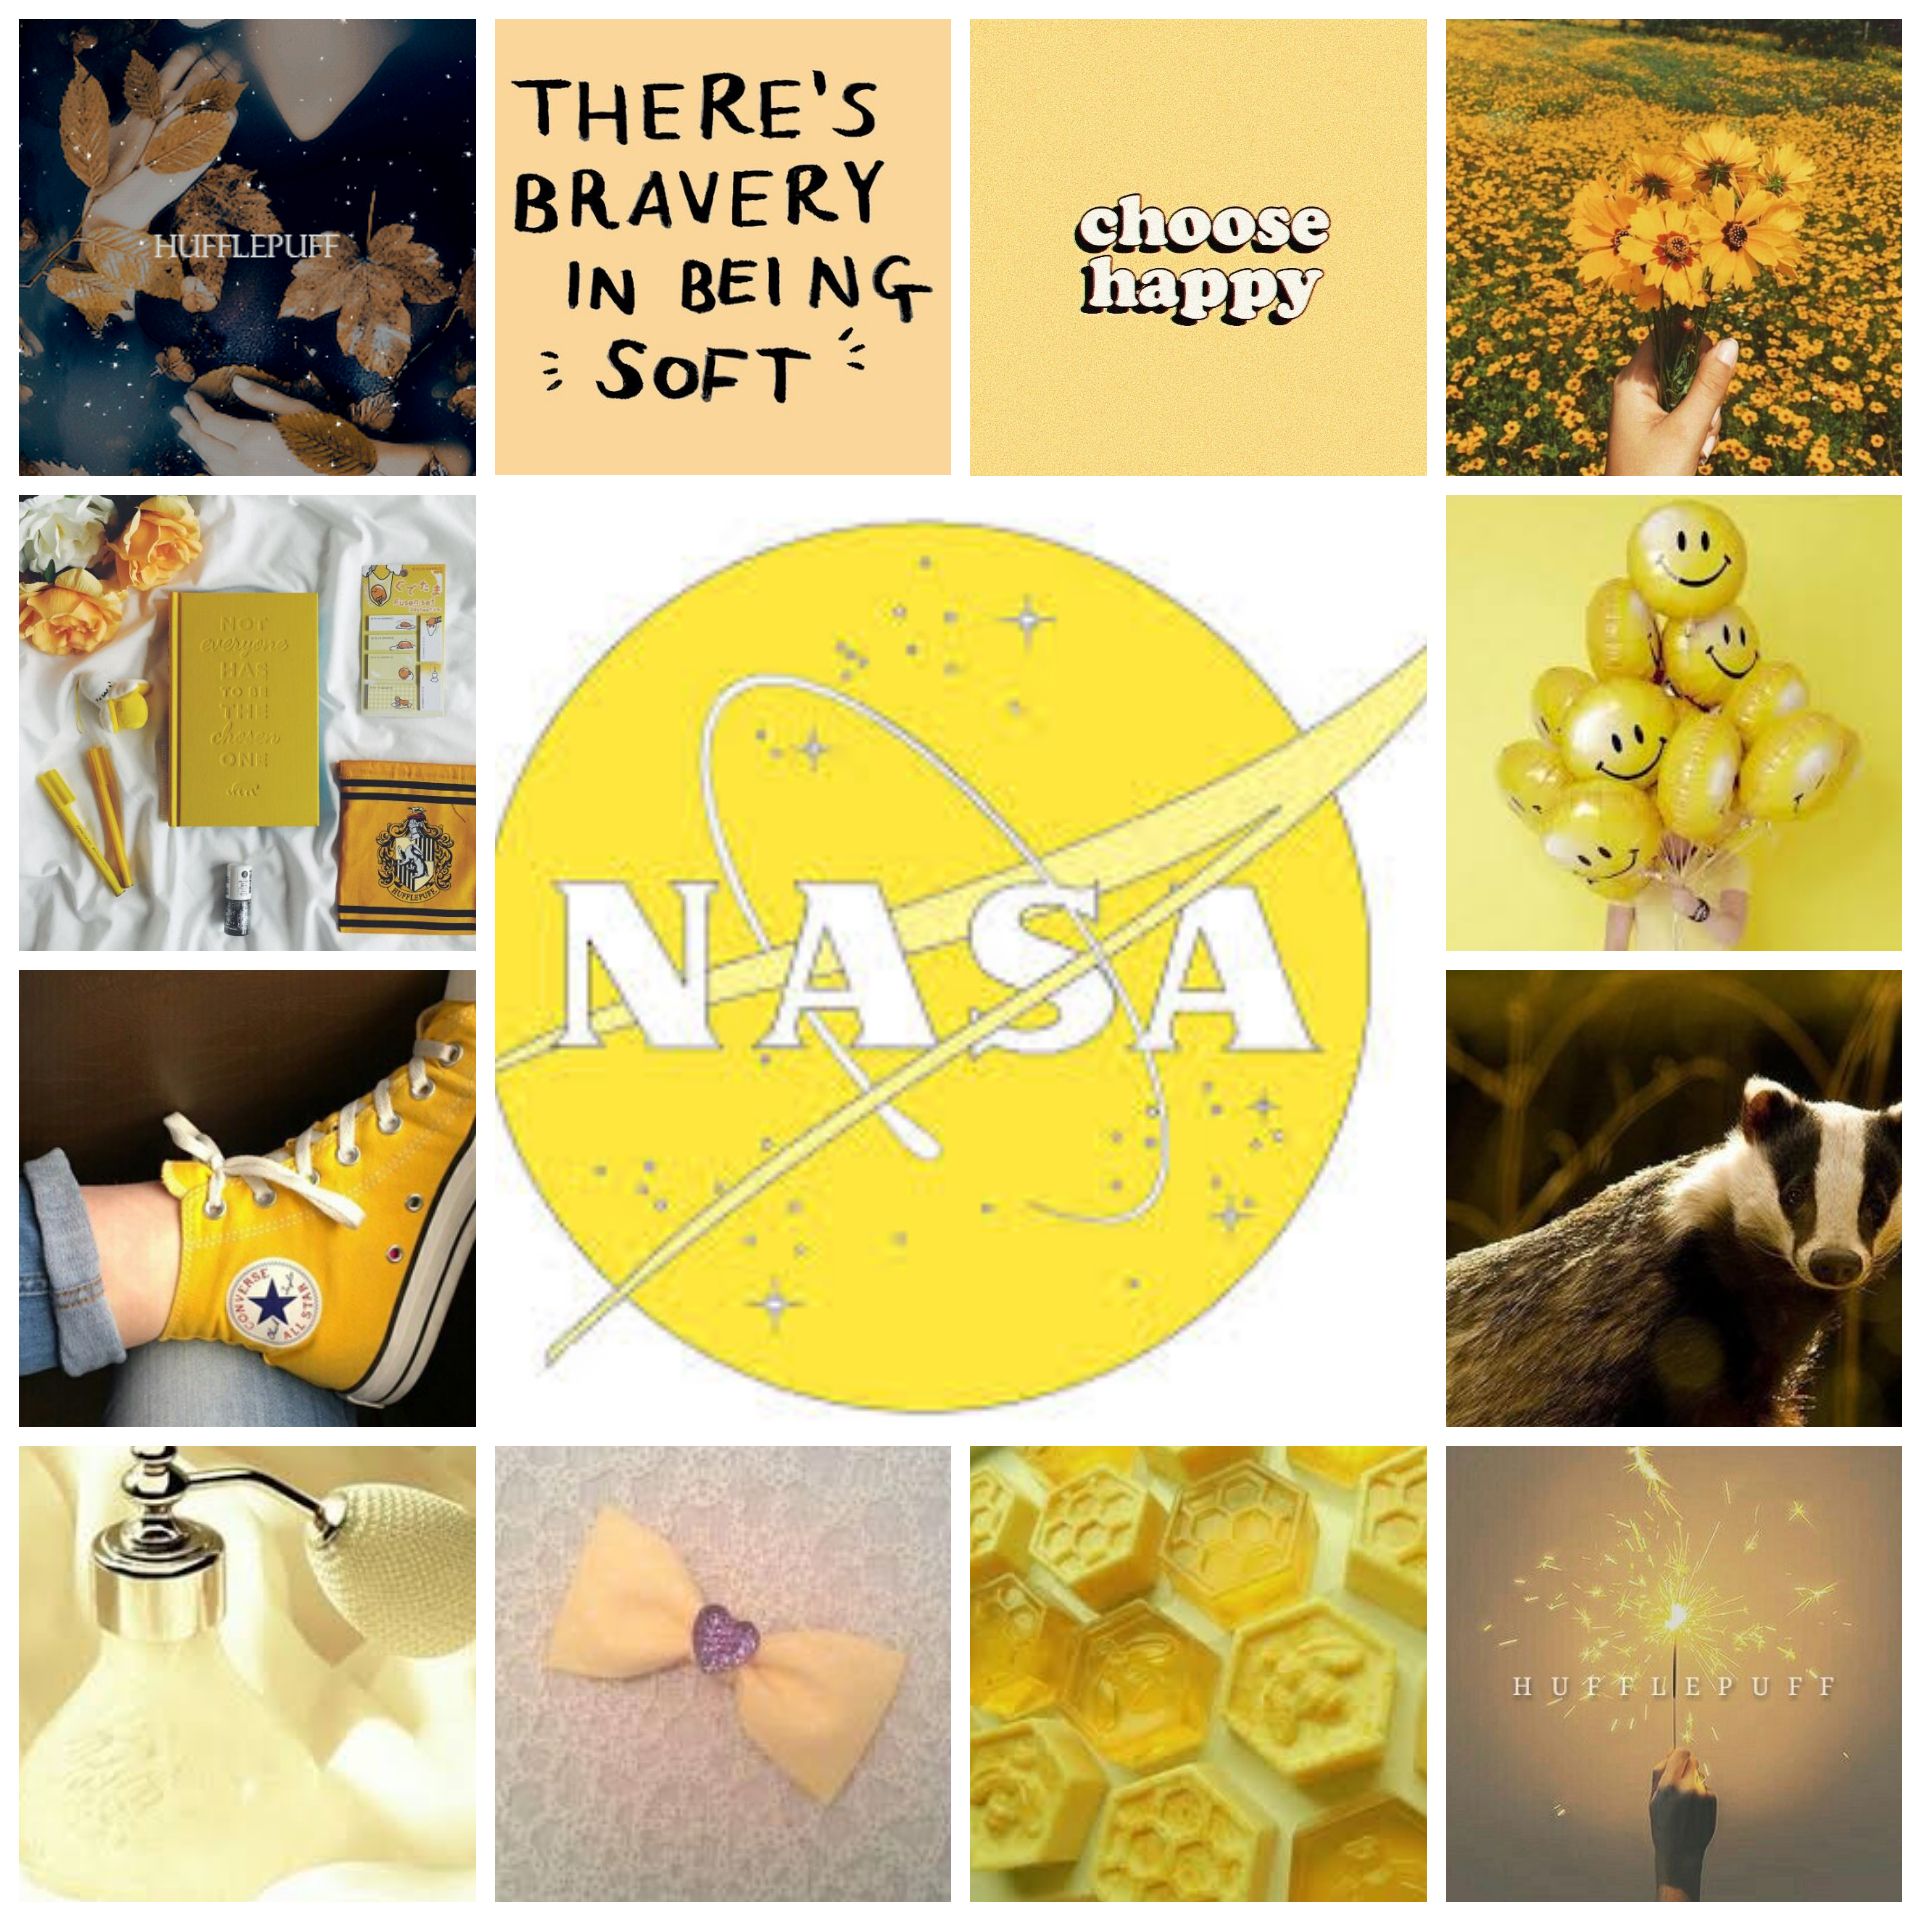 A collage of NASA images and other aesthetic pictures - Hufflepuff